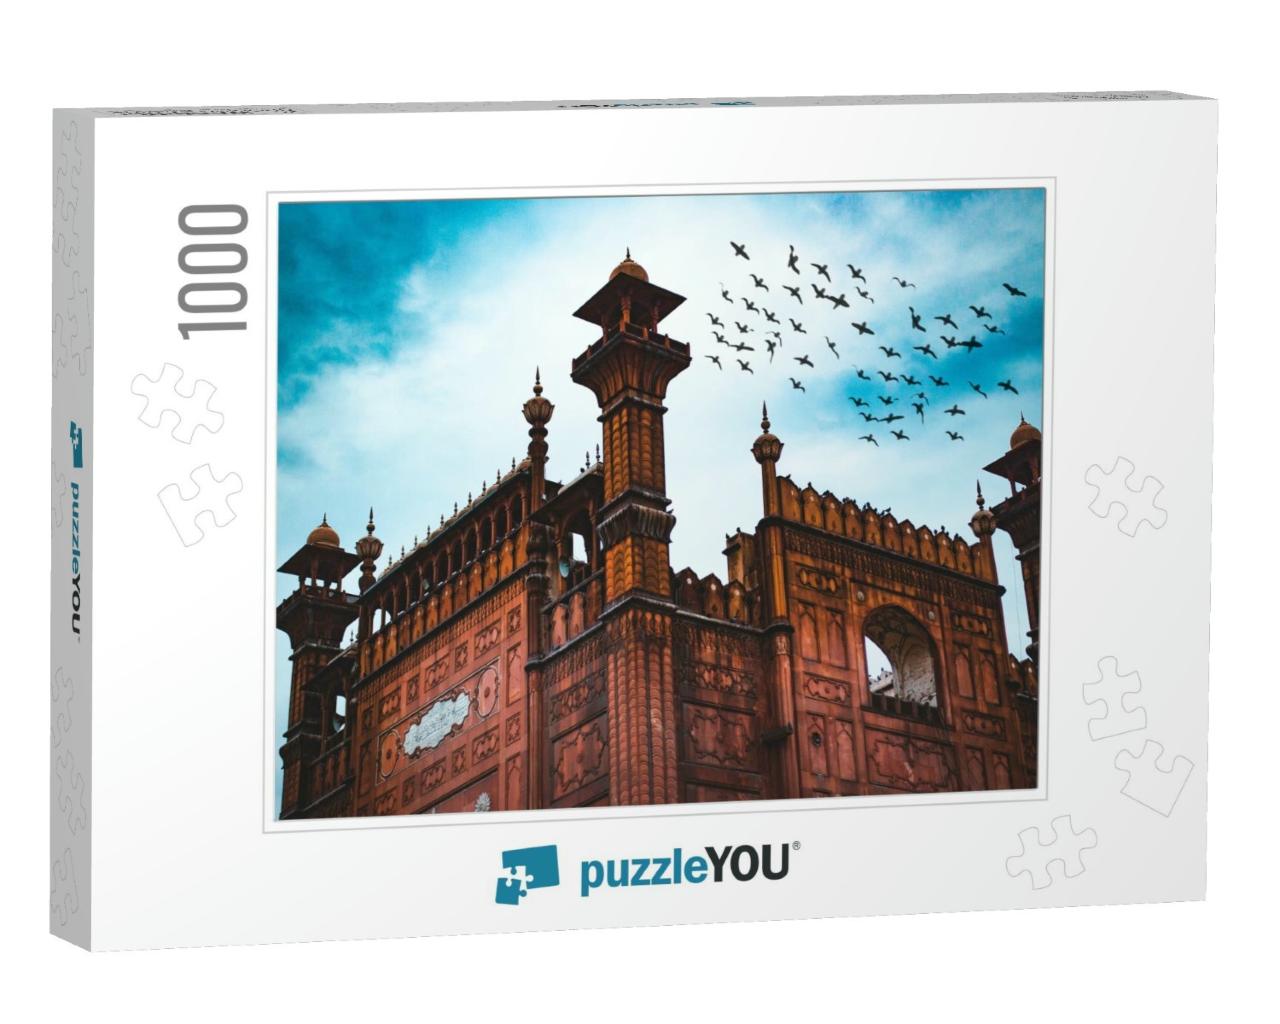 Badshahi Mosque Lahore... Jigsaw Puzzle with 1000 pieces